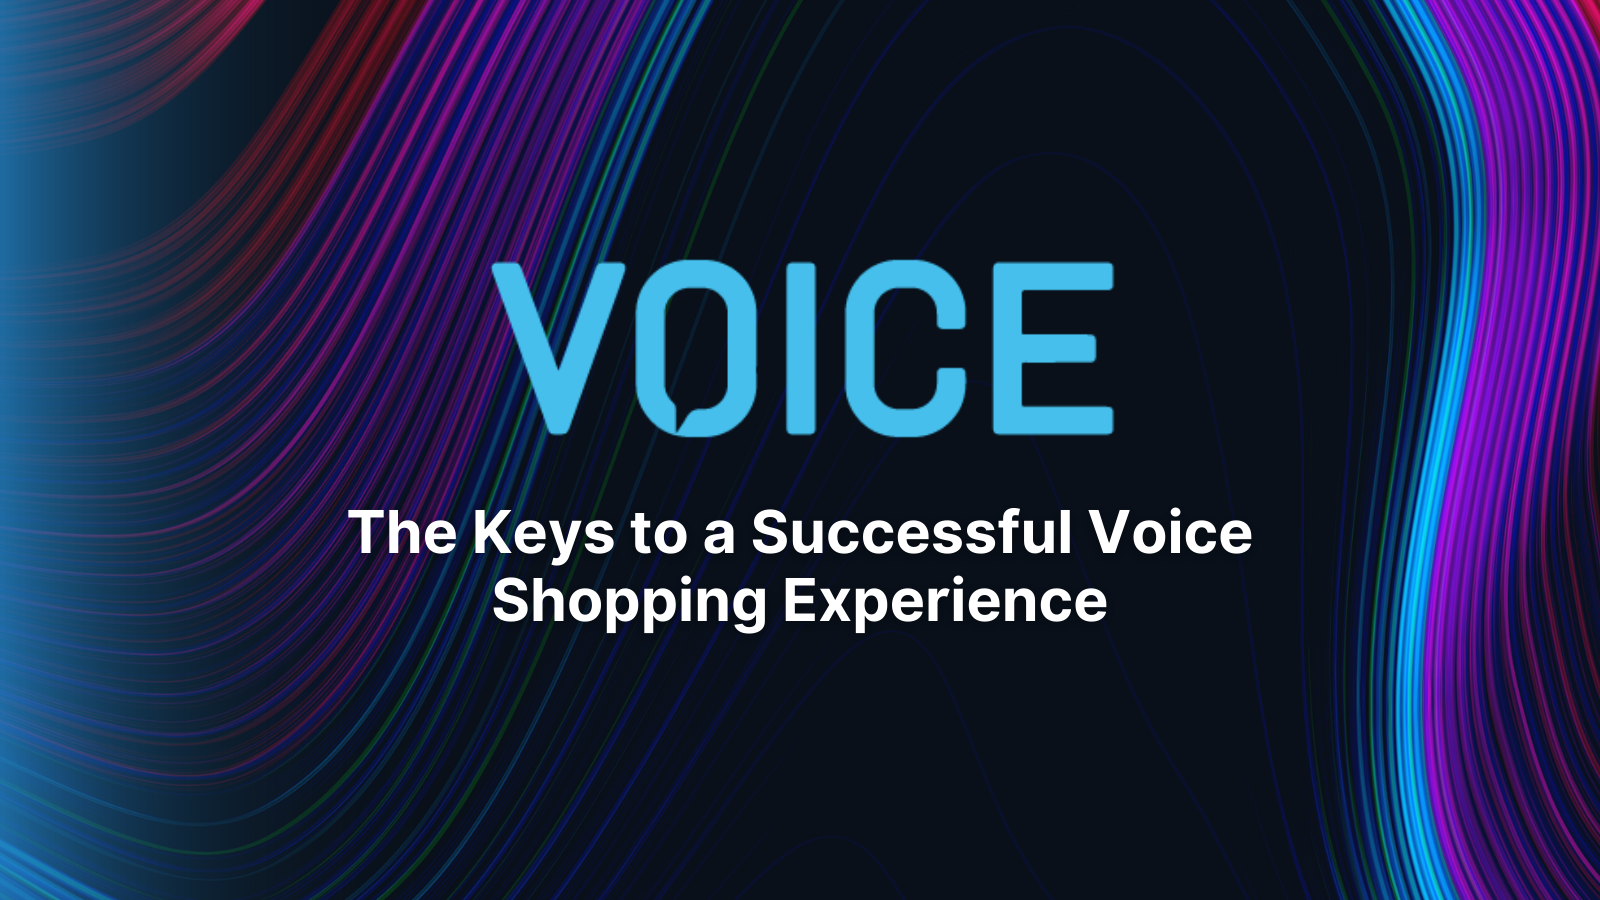 The Keys to a Successful Voice Shopping Experience